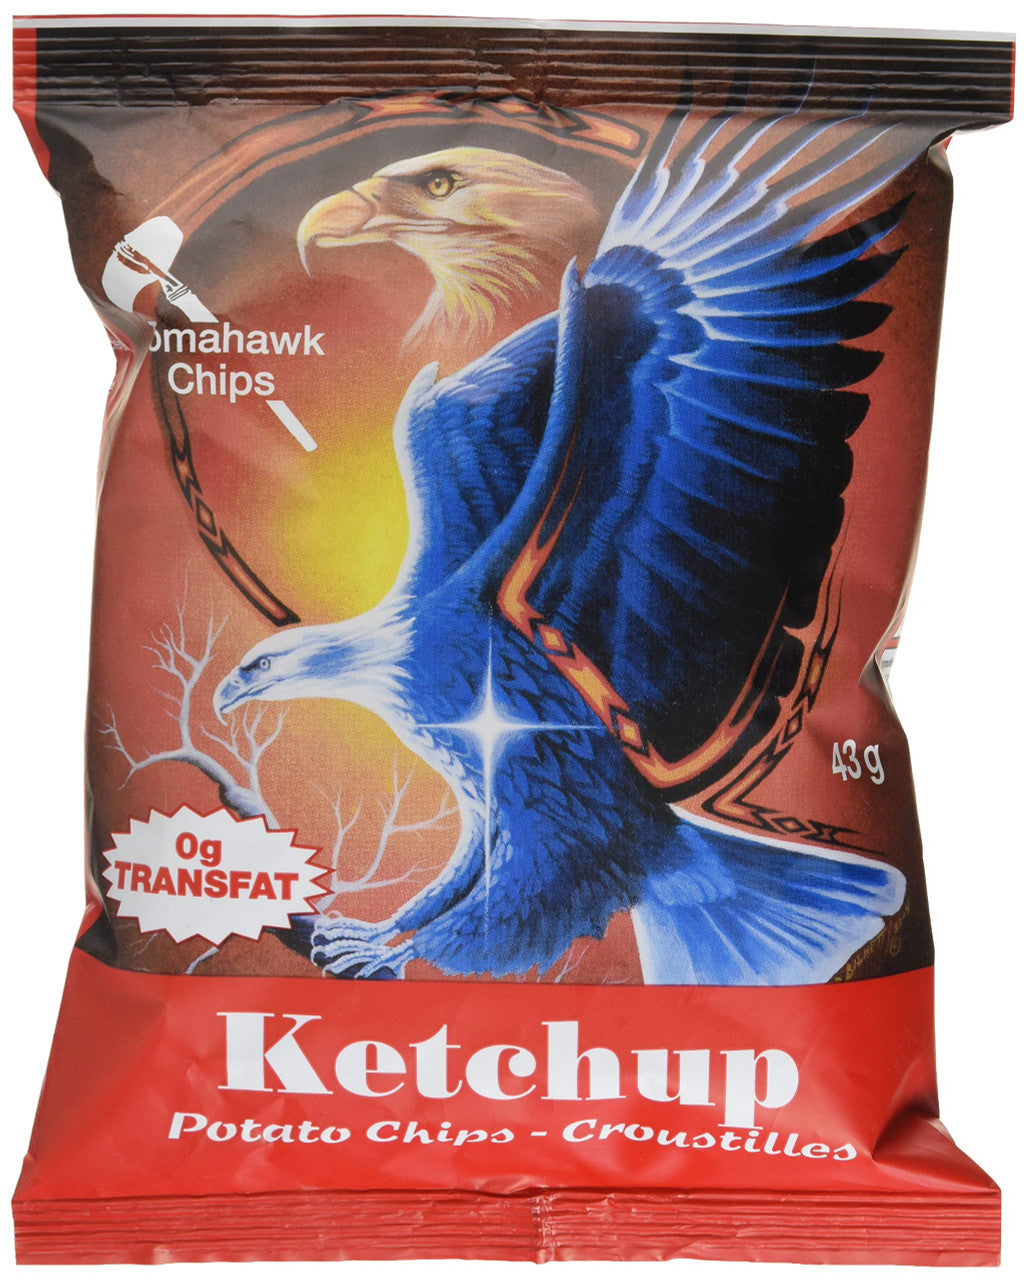 Tomahawk Ketchup Flavour Potato Chips, 43g/1.5 oz., Vending Size Bag, {Imported from Canada}